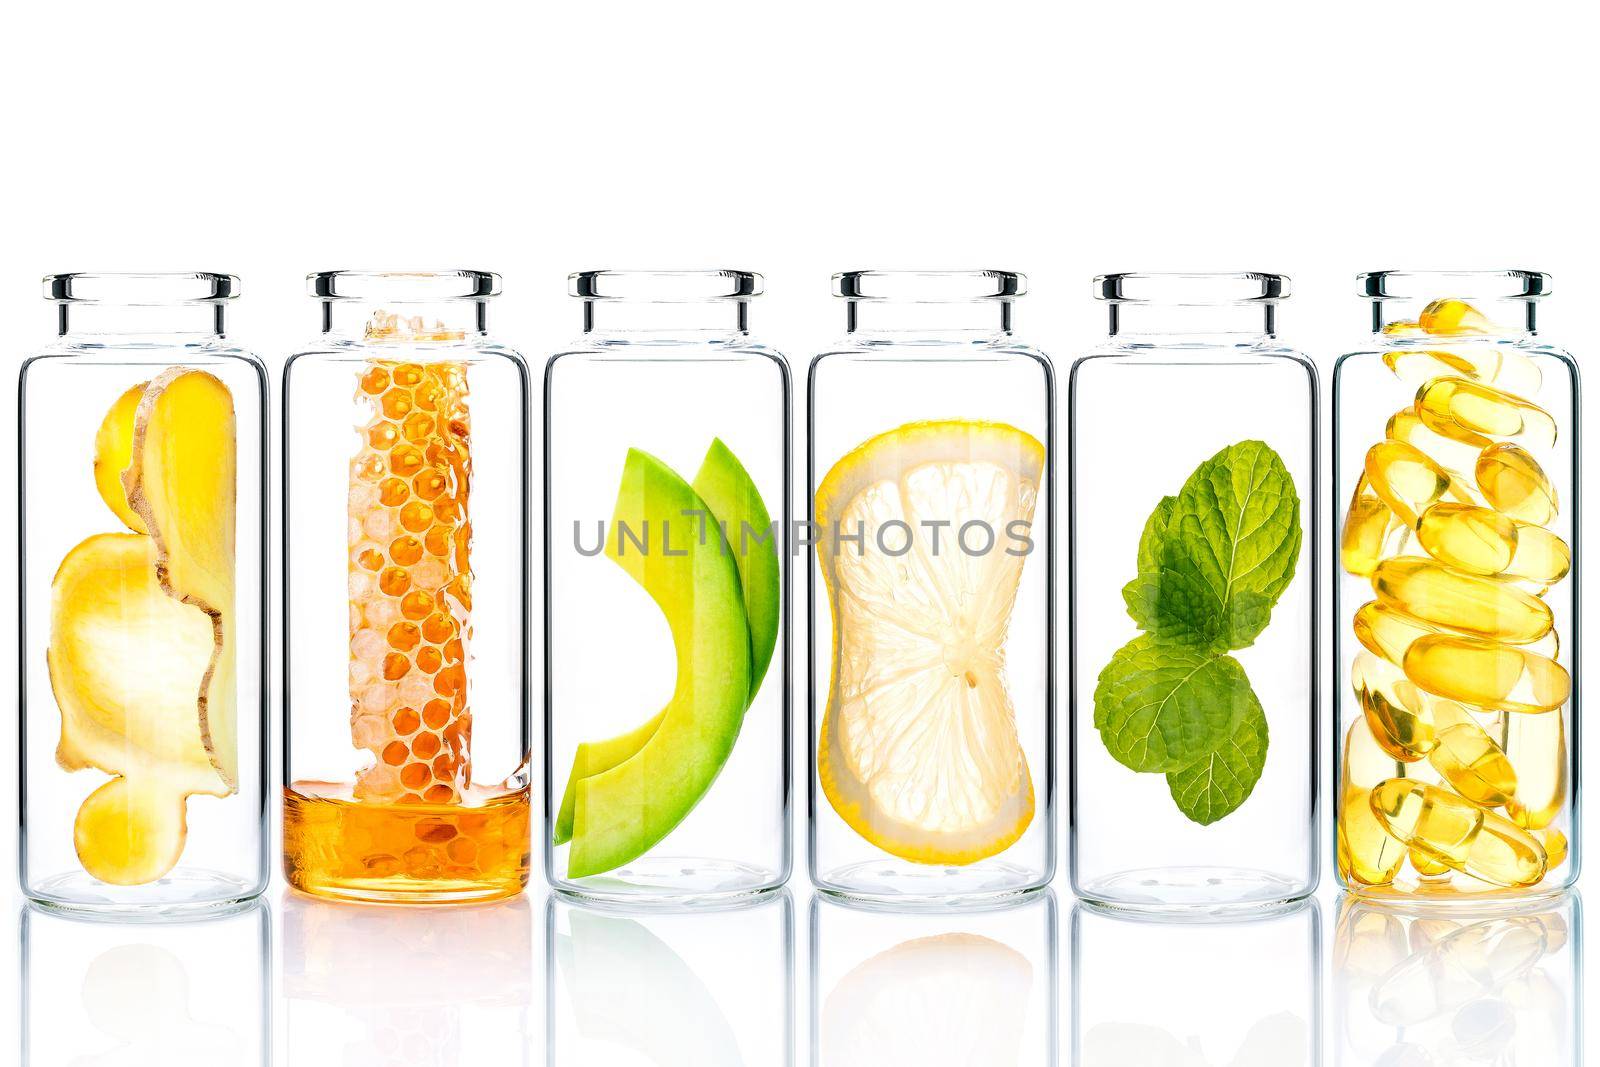 Alternative skin care and homemade scrubs with natural ingredients  in glass bottles isolate on white background.